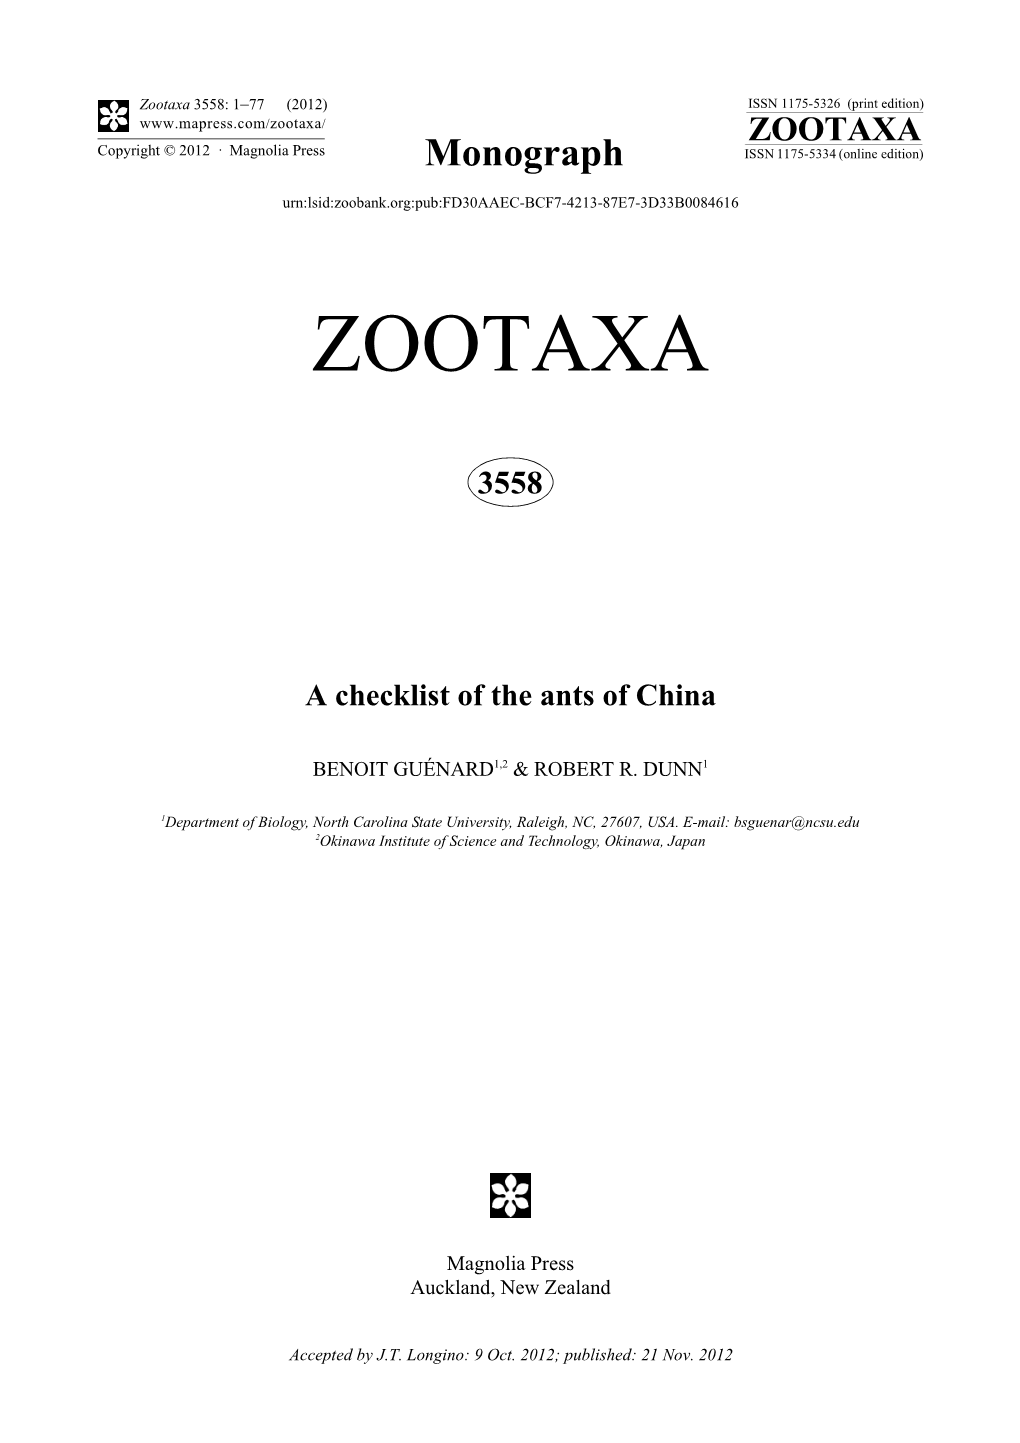 A Checklist of the Ants of China